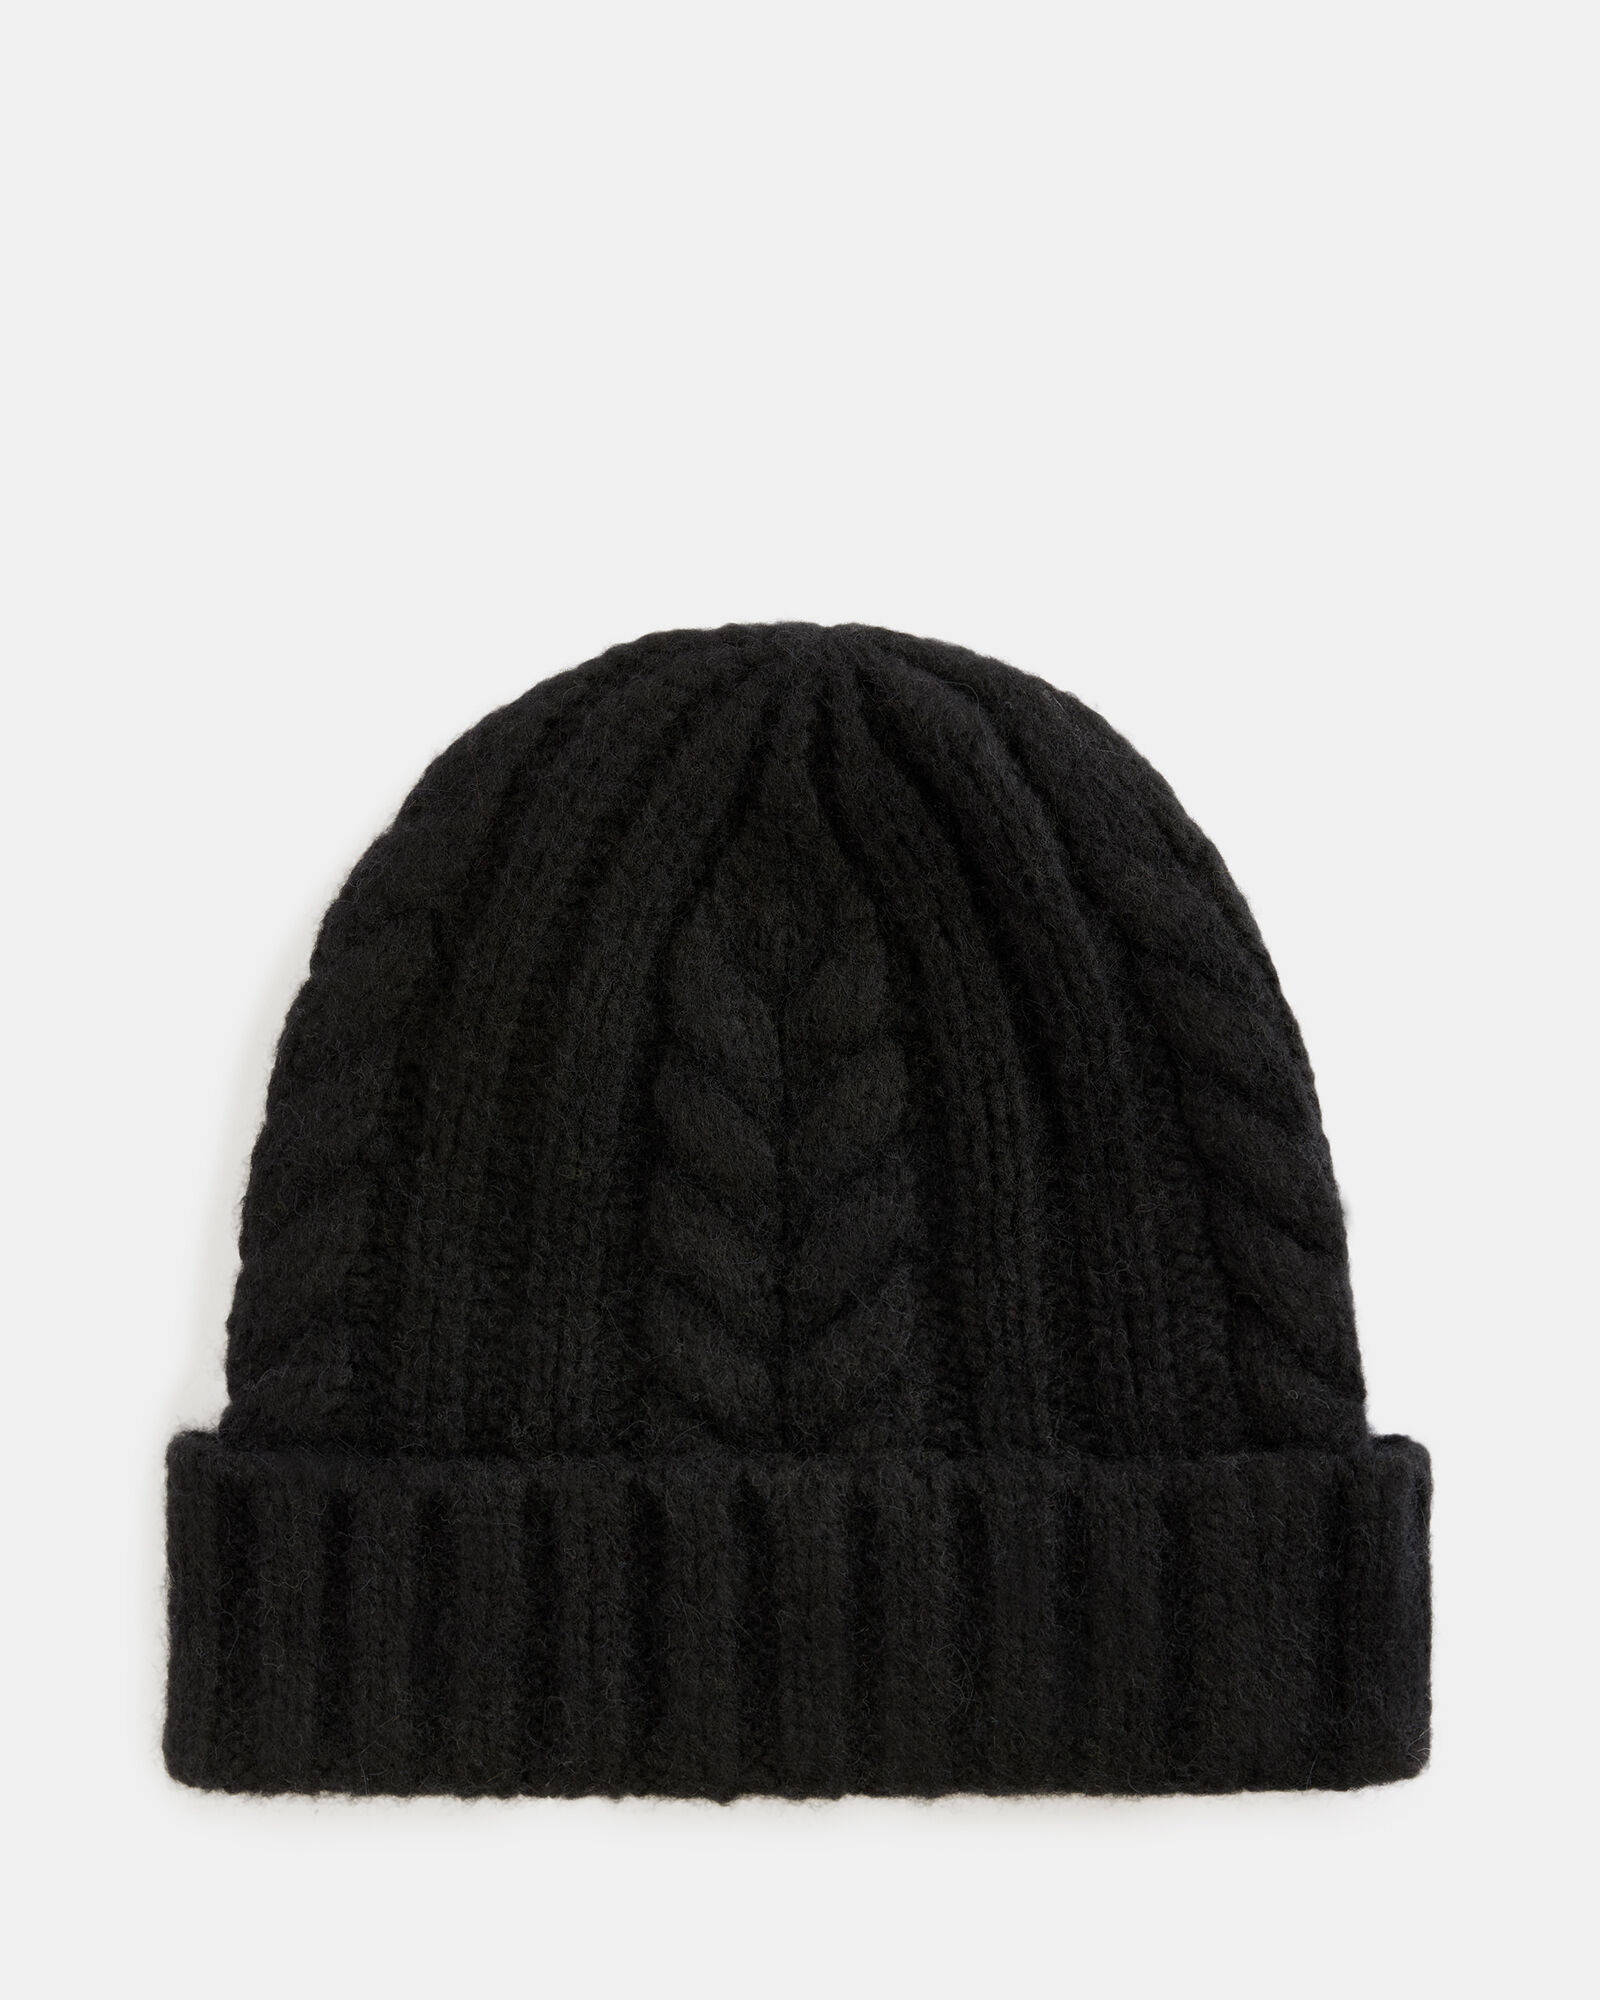 Kim Cable Knit Wool Blend Beanie